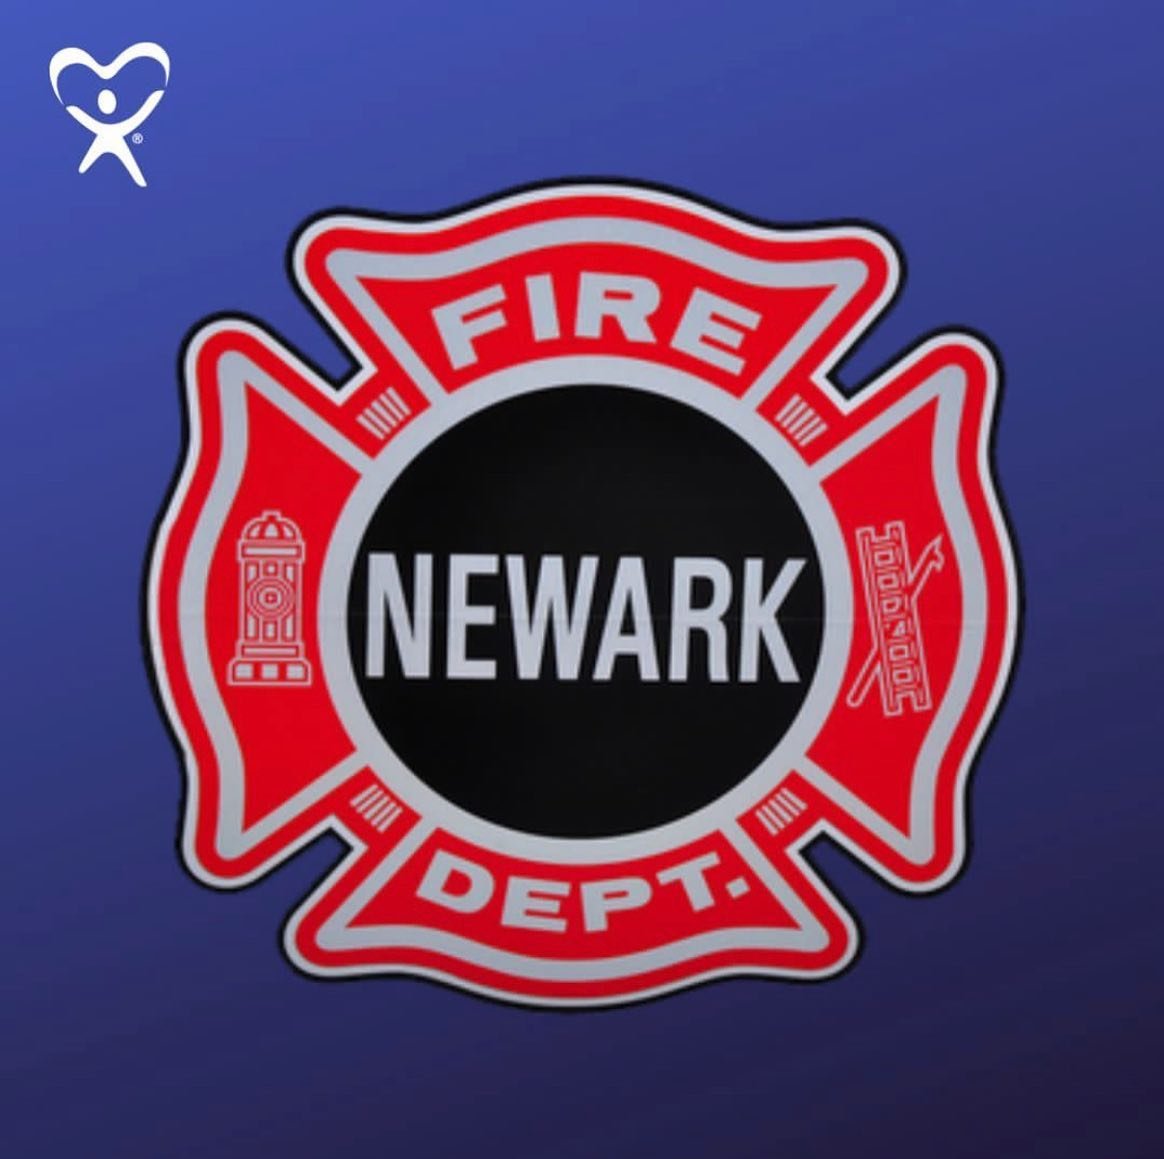 &ldquo;Uniting a Brighter Tomorrow&rdquo; - today, we shine a spotlight on the real superheroes of our community - the courageous firefighters at @NewarkEngine10 and our dedicated volunteer advocates! Just like the heroes in capes we see in the movie